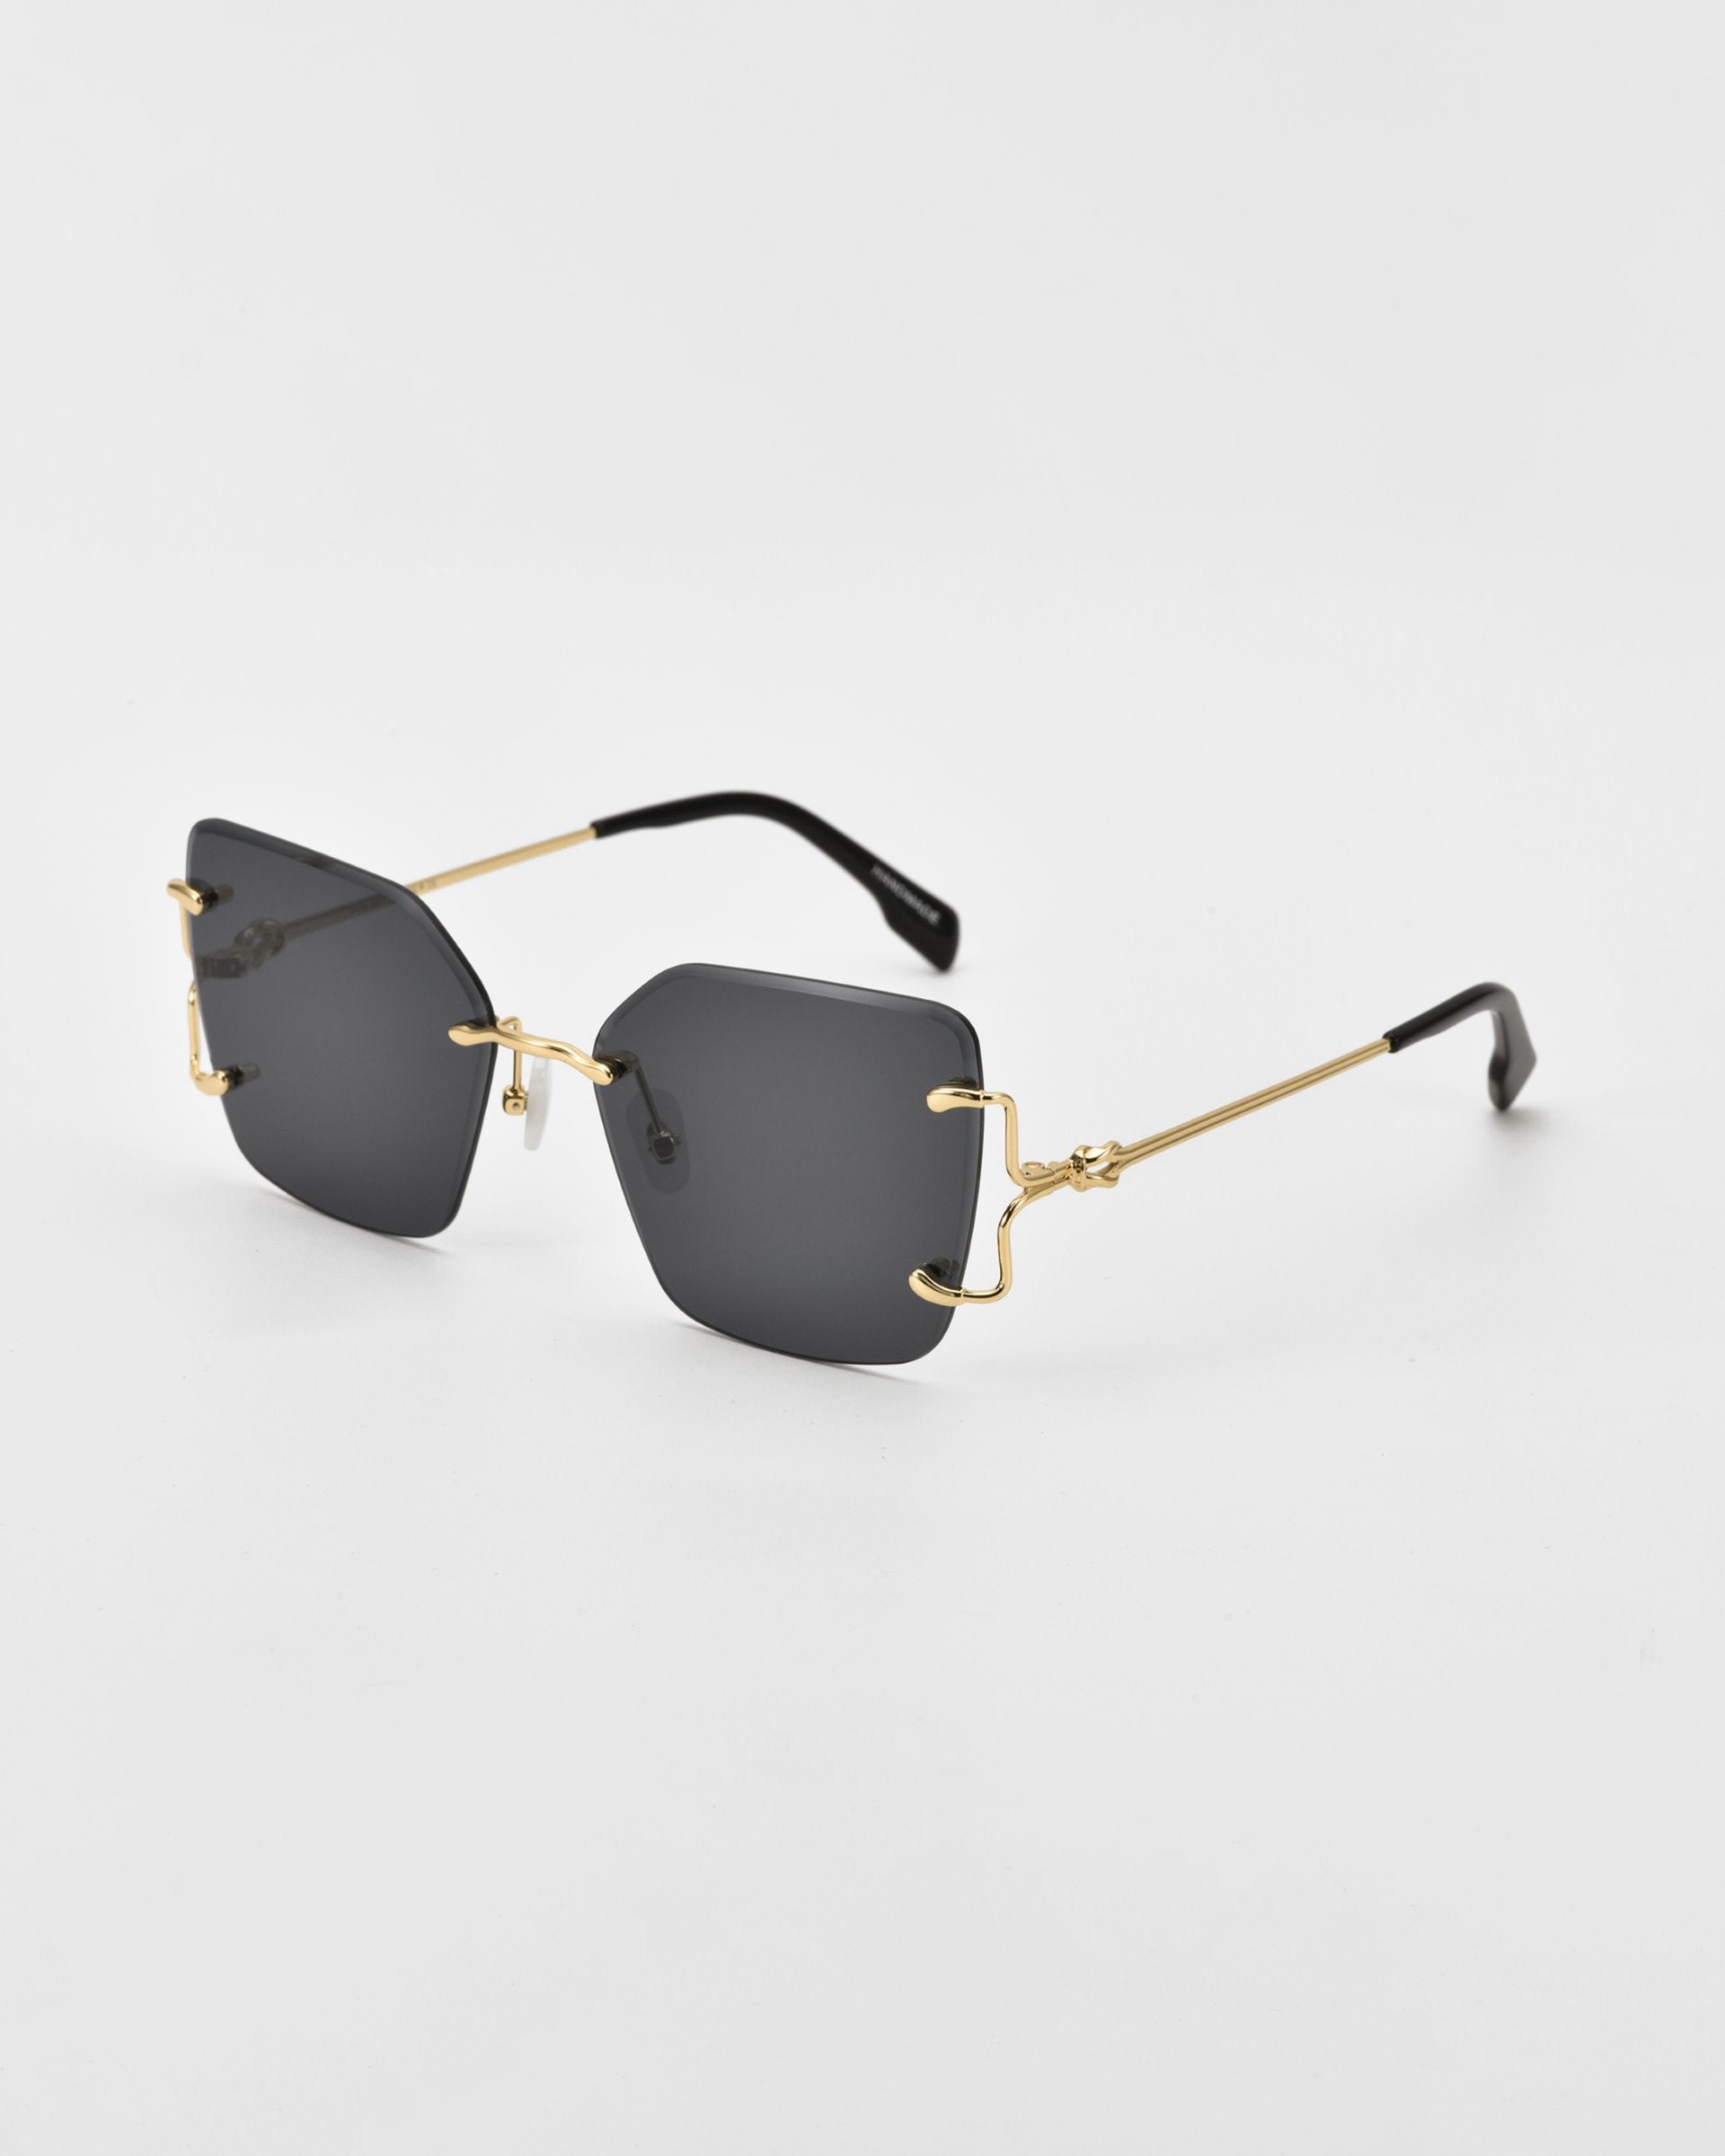 A pair of stylish For Art's Sake® Starlit sunglasses with dark, oversized square lenses and gold-tone, wireframe temples. The design is minimalistic with a modern aesthetic, featuring black temple tips and jade-stone nosepads. The background is plain white.